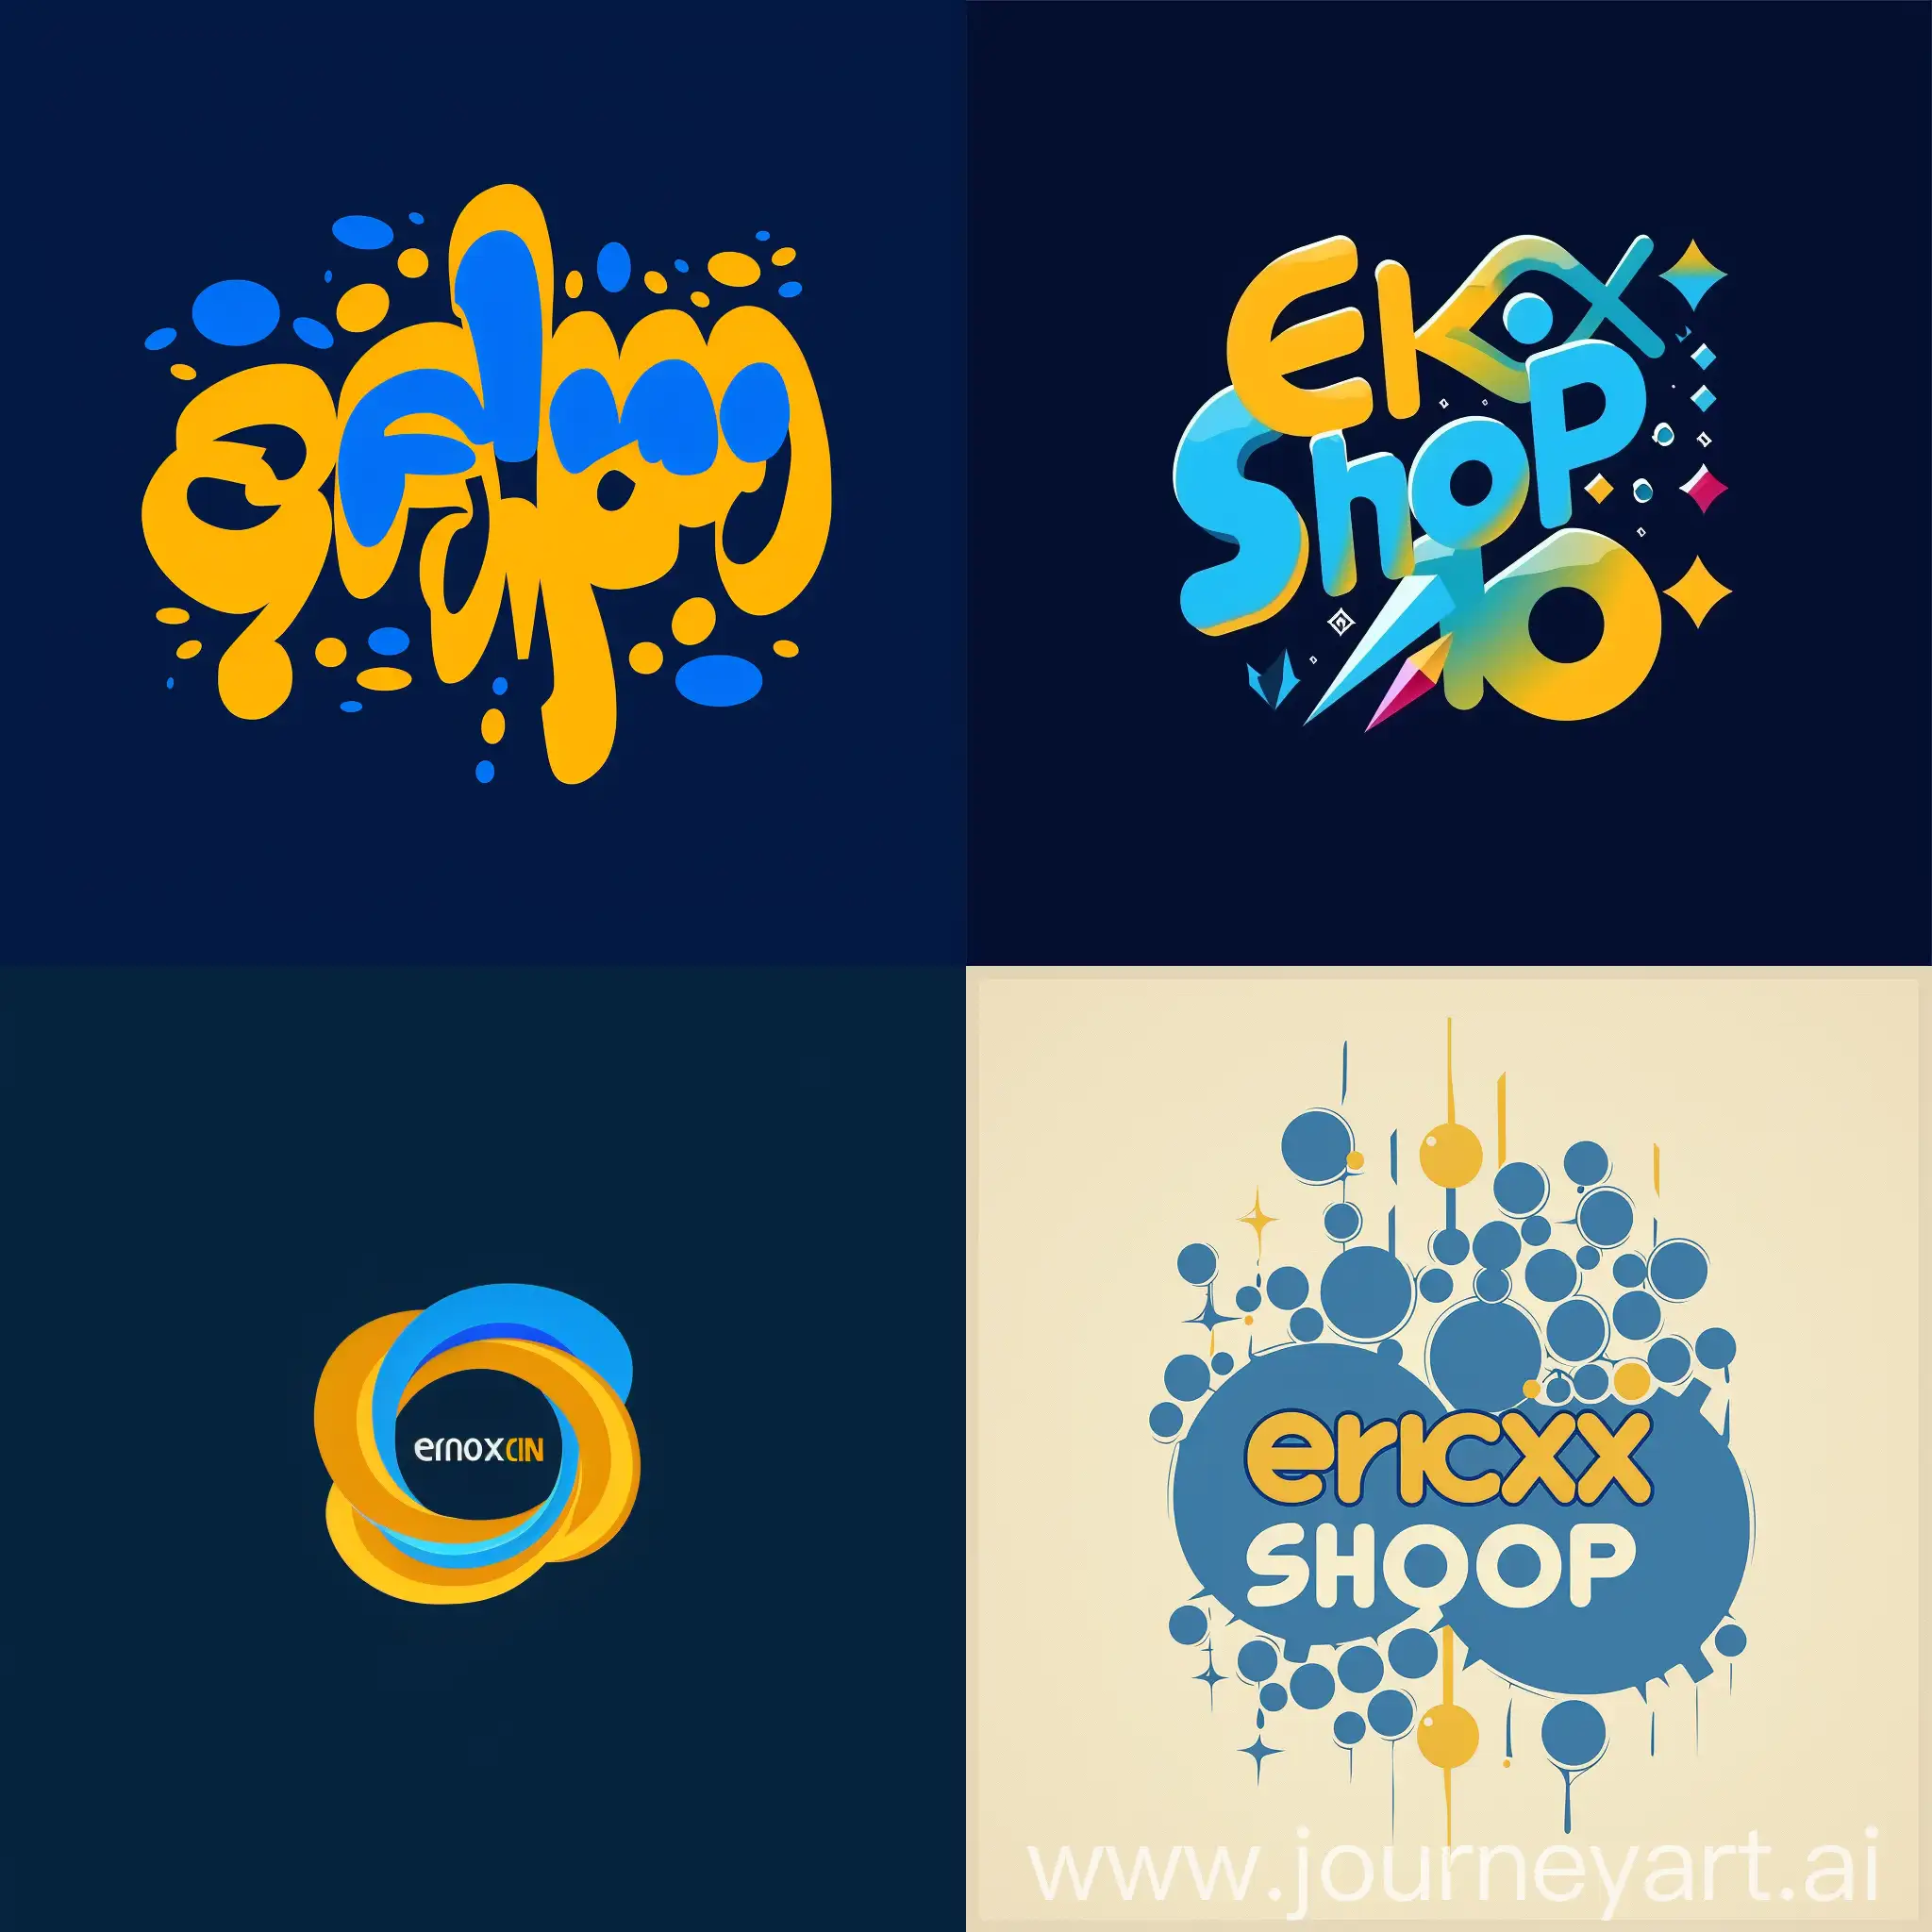 creathe some random logos with text 'ernoxin shop' use blue or yellow color and be careful about dictation of ernoxin shop you should use ernoxin shop!!!